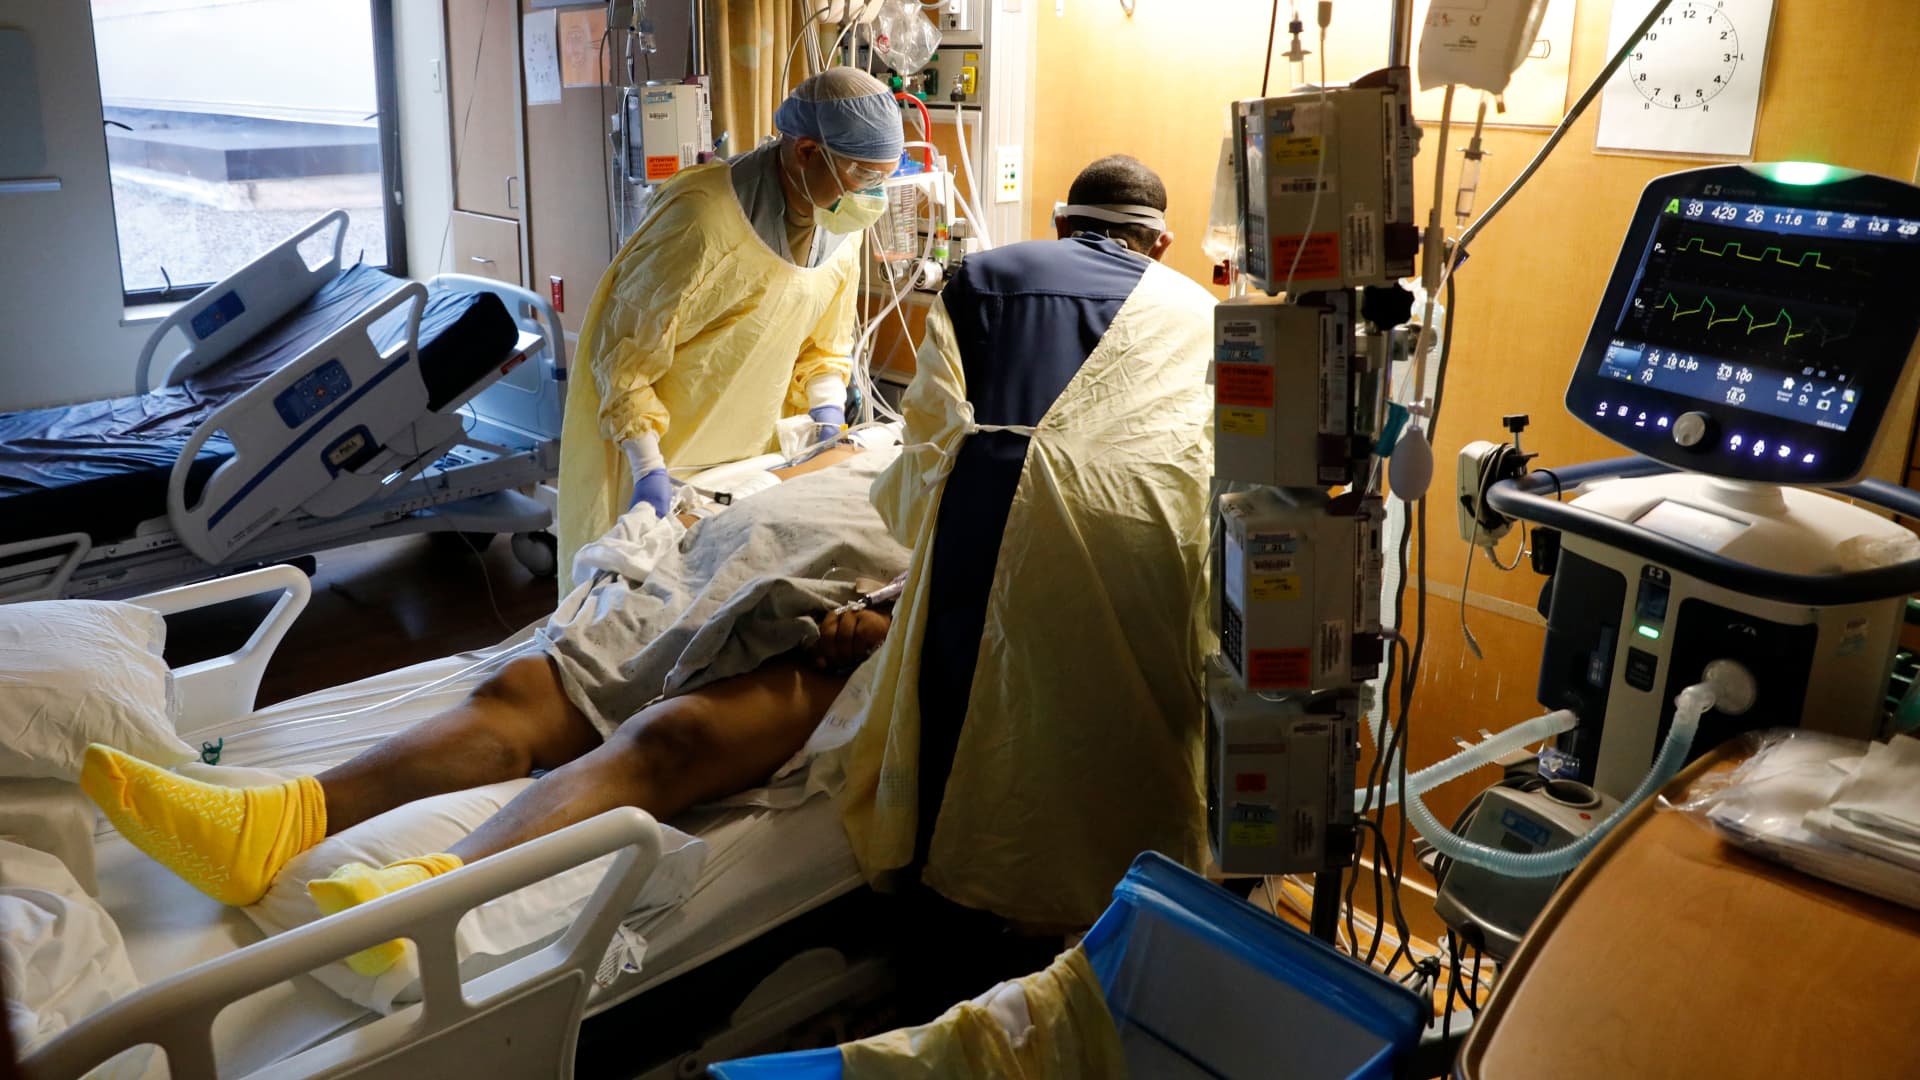 US Army Critical Care Nurse, Captain Edward Rauch Jr. (L), turns a Covid-19 patient on a ventilator at Beaumont Hospital in Dearborn, Michigan on December, 17, 2021.